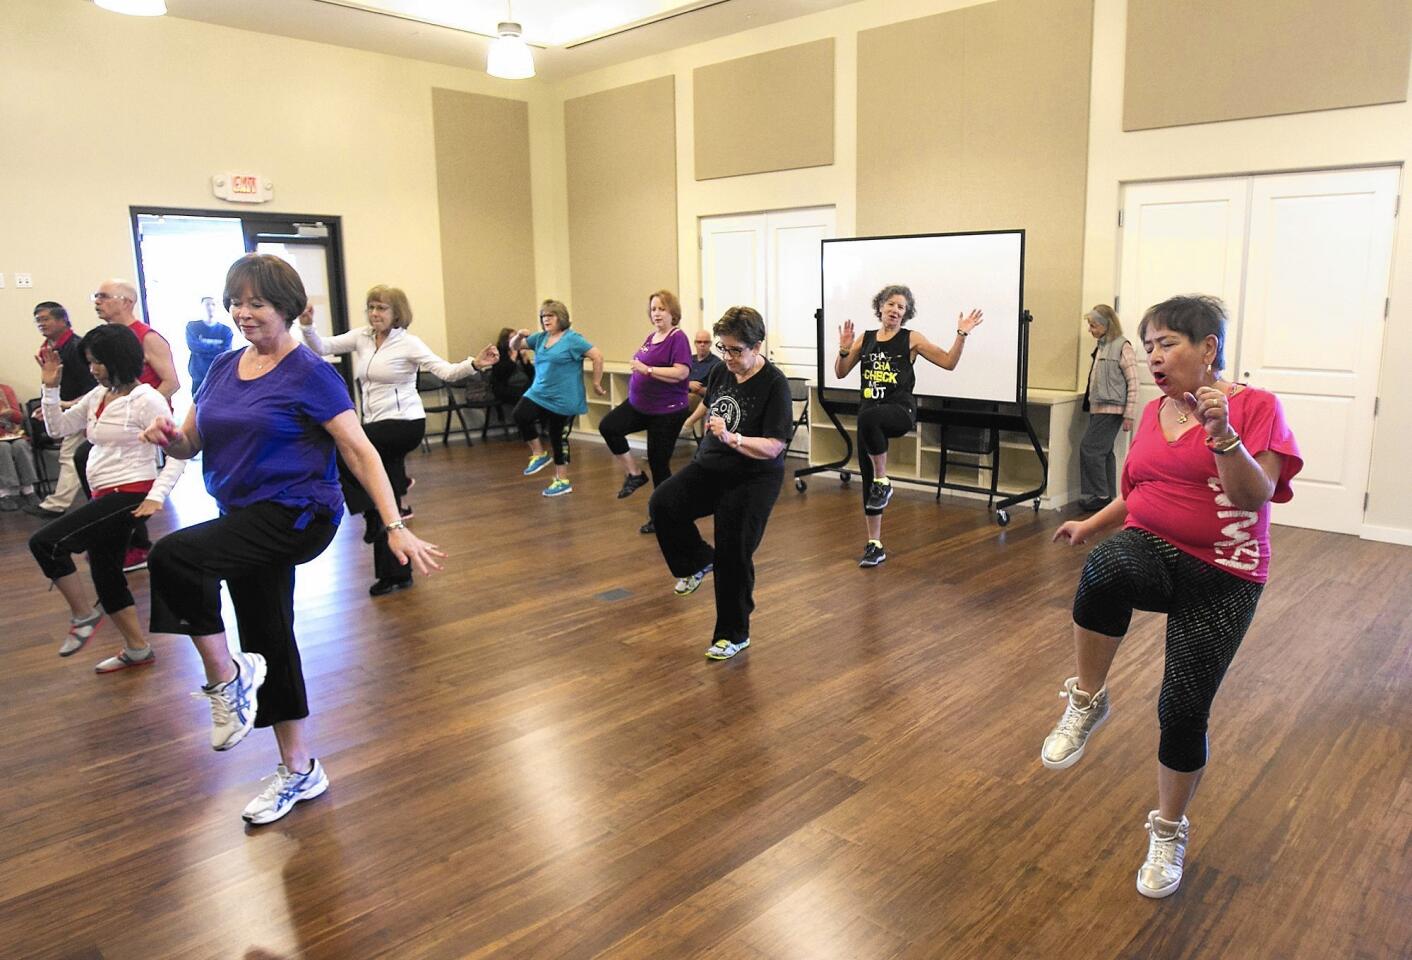 A Zumba class gets underway during public grand opening ceremony of the Trabuco Center, Irvine's third senior center on Saturday. The new center features the latest exercise equipment, fitness programs, and free Wi-Fi in the courtyard.